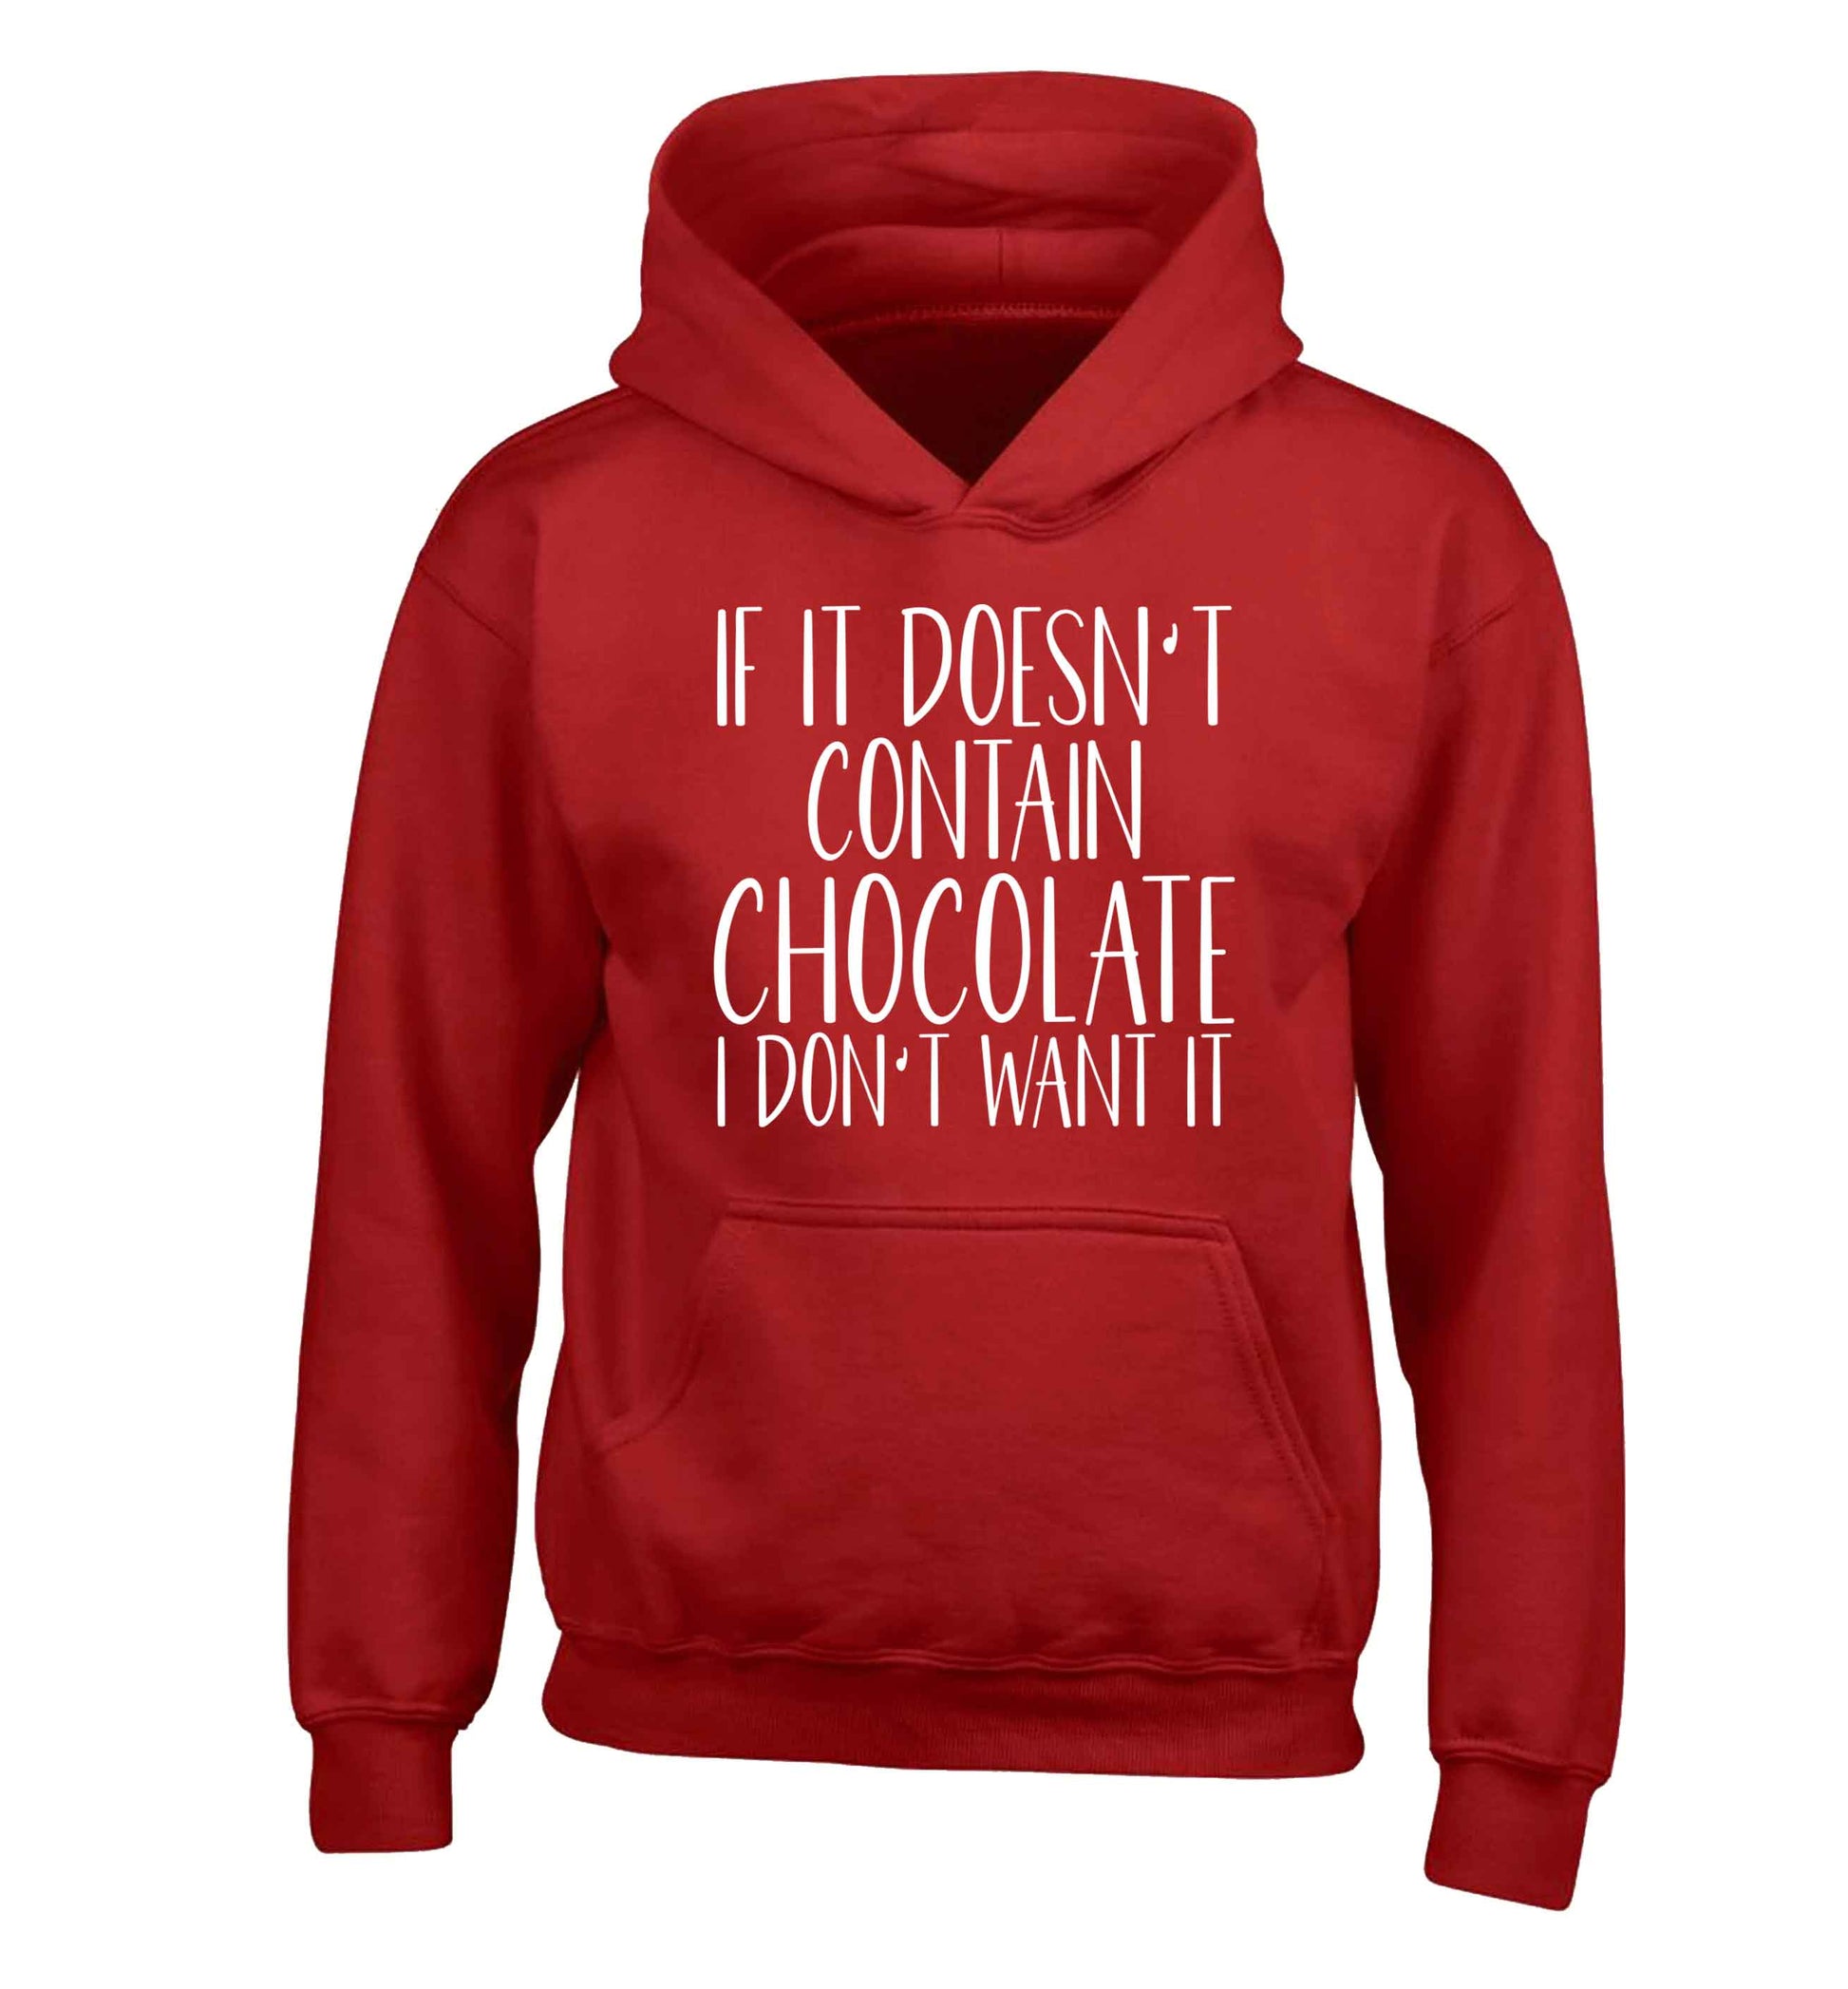 If it doesn't contain chocolate I don't want it children's red hoodie 12-13 Years